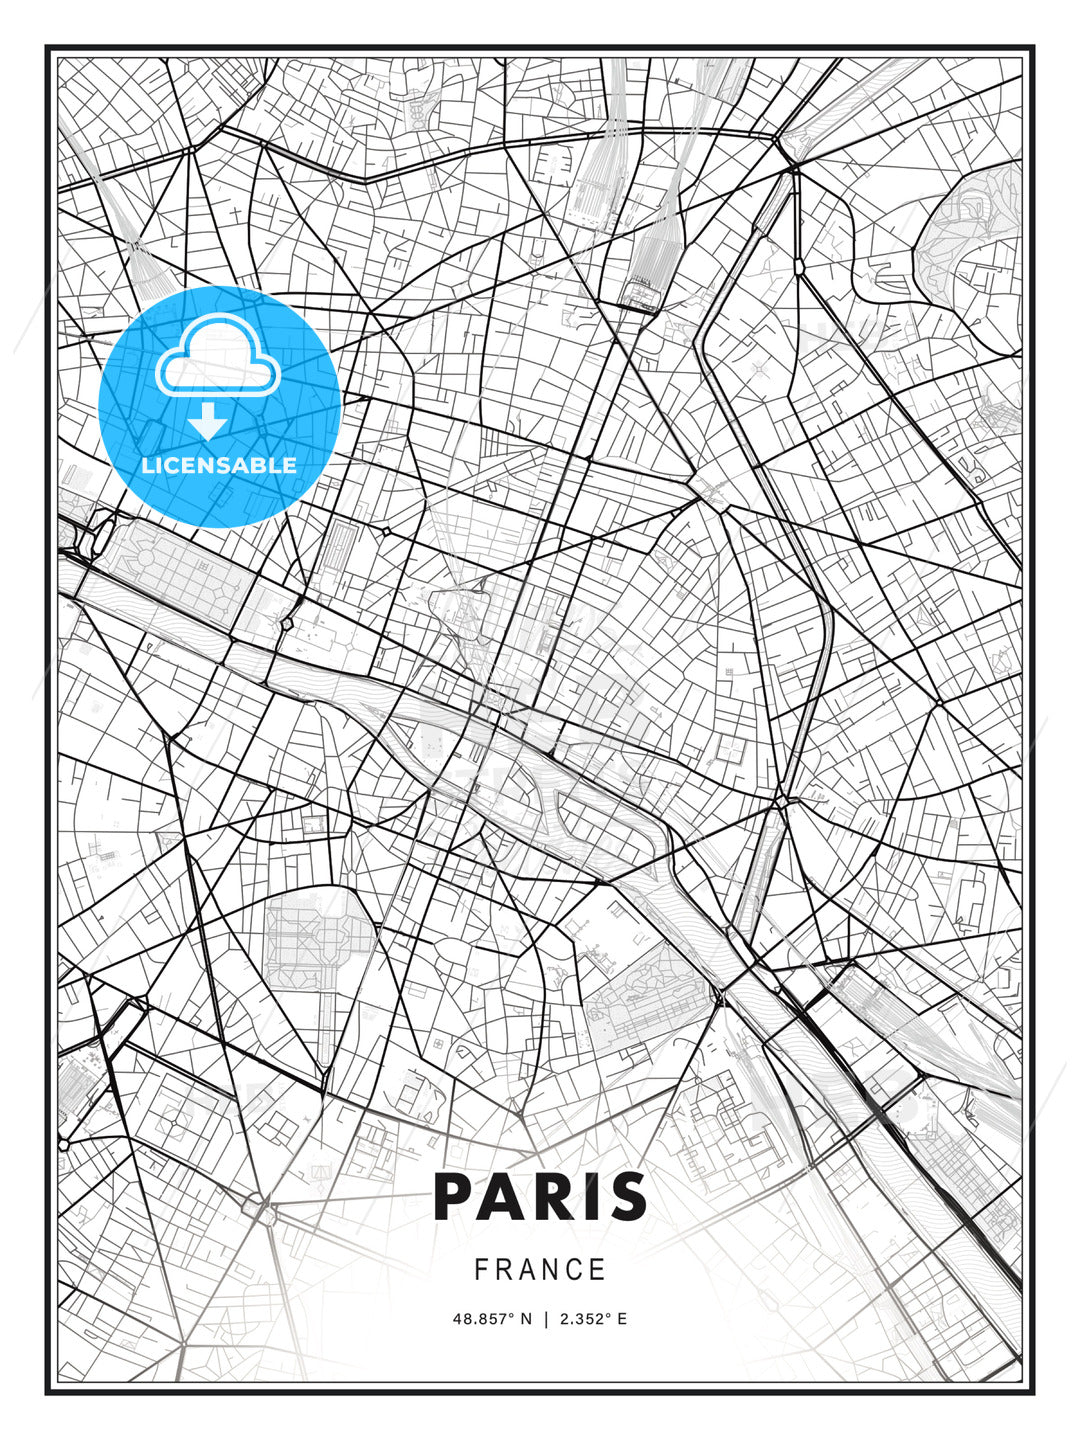 Paris, France, Modern Print Template in Various Formats - HEBSTREITS Sketches